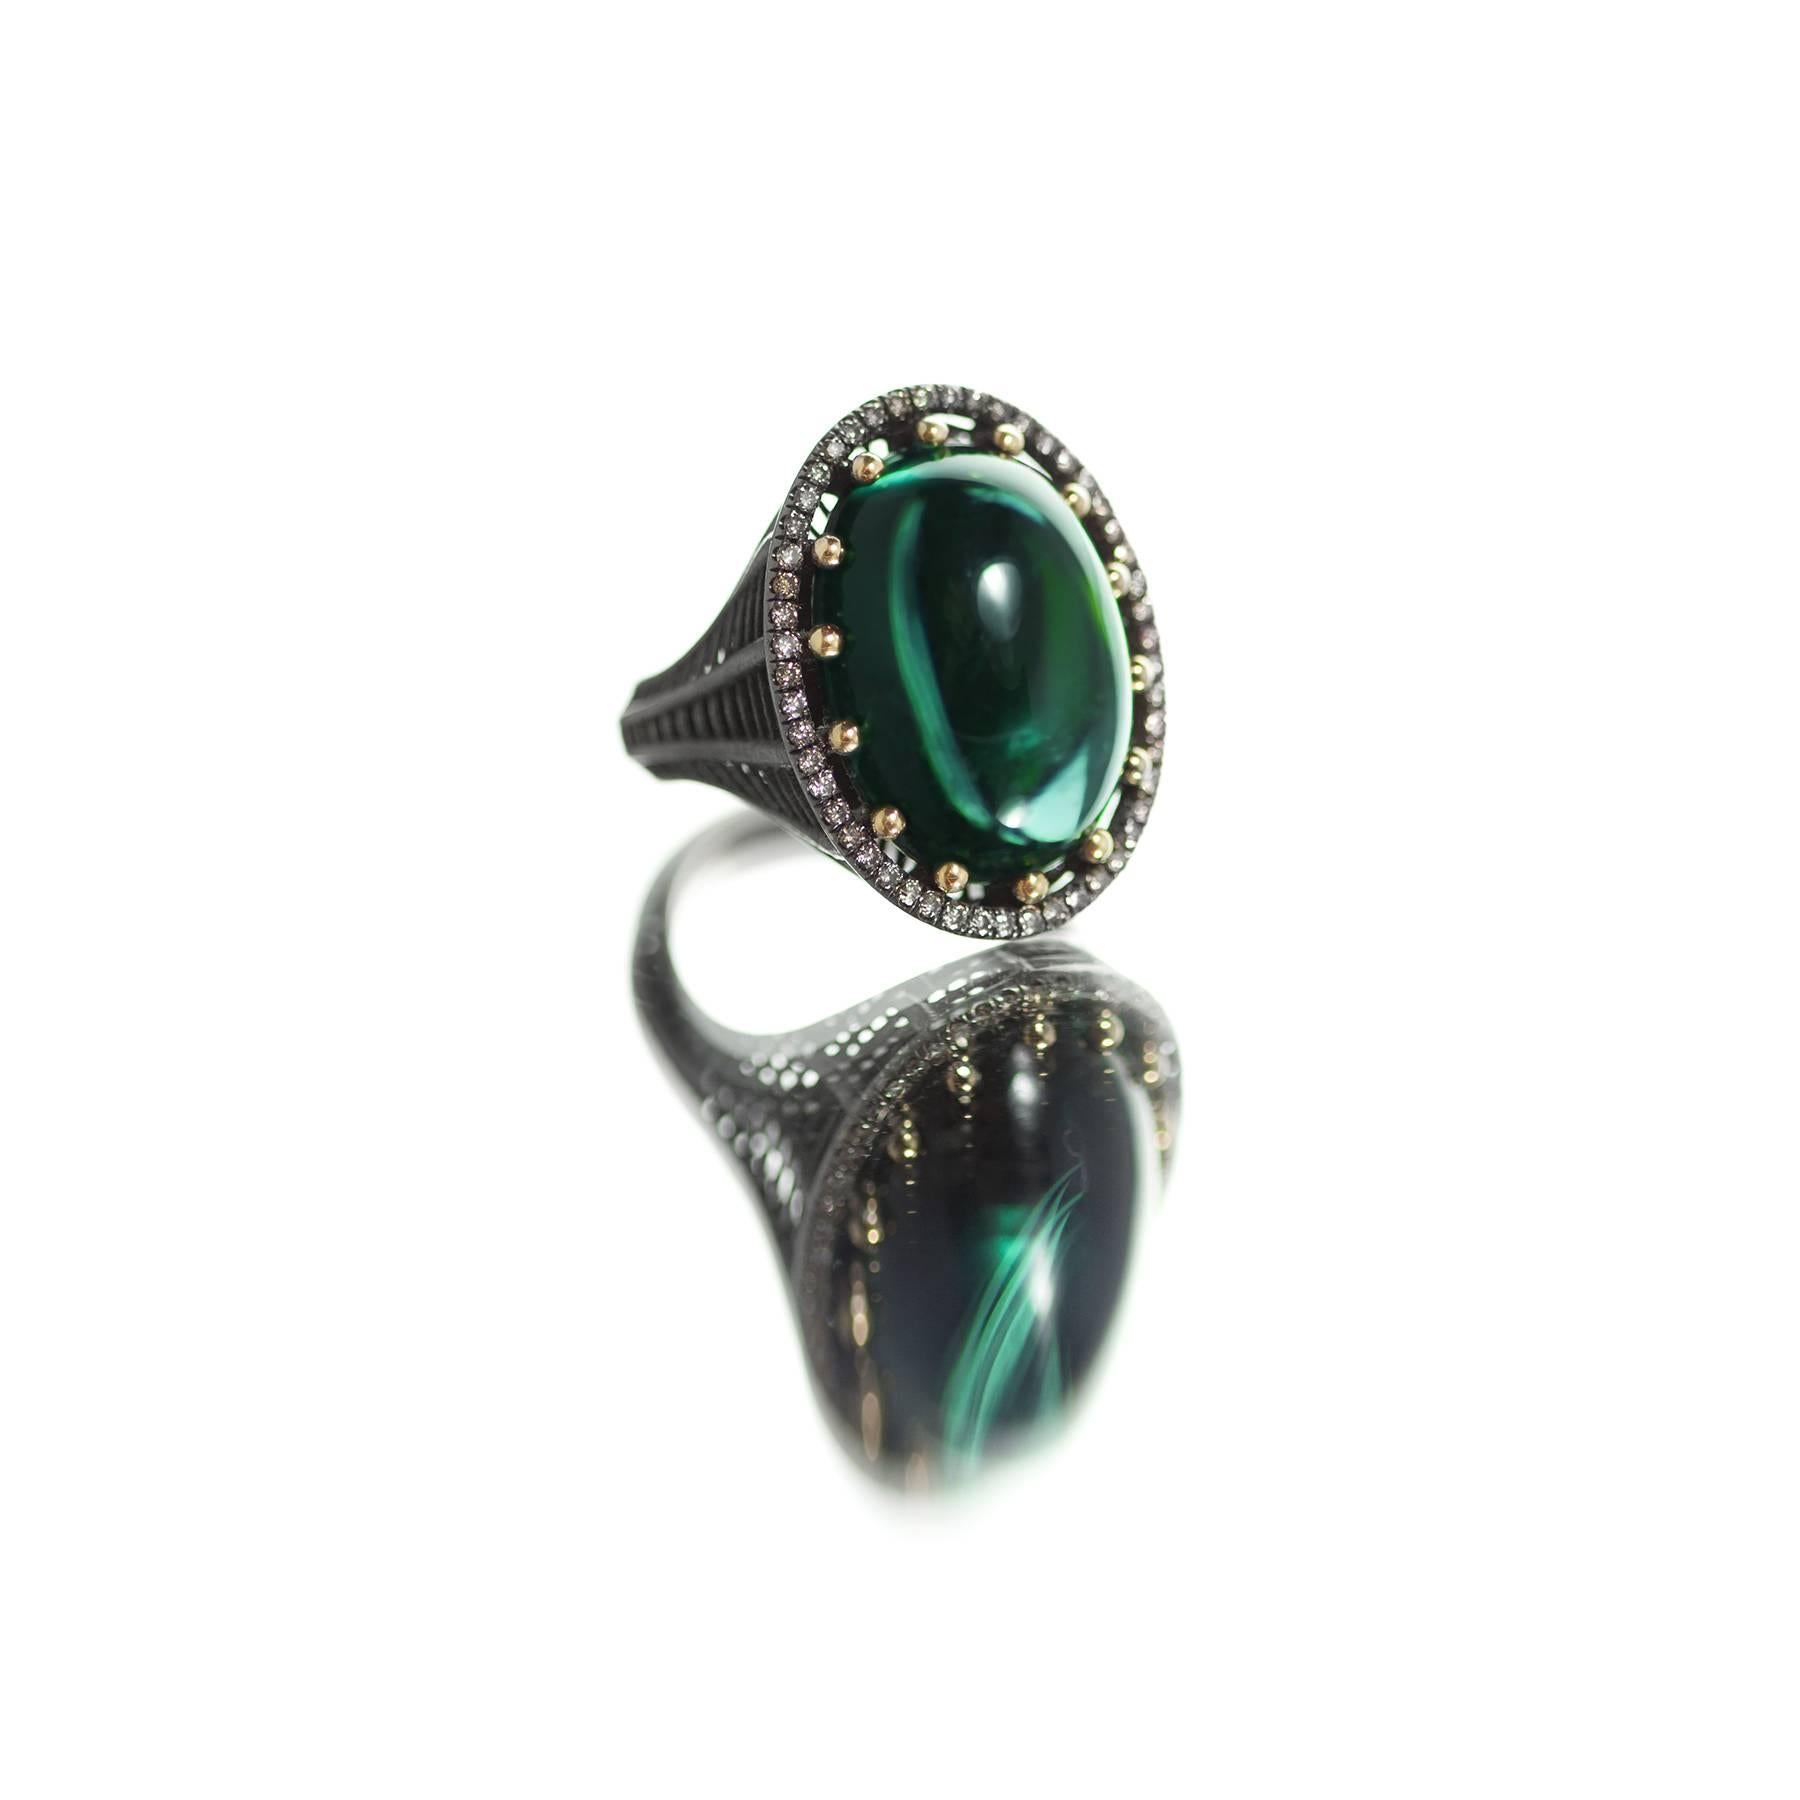 A cocktail ring in blackened 18k yellow gold with ball prong-set green tourmaline cabochon (17 ct) and champagne diamond pavé (0.52 cts). Cabochon is 13 x 18mm (or roughly 1/2 x 3/4